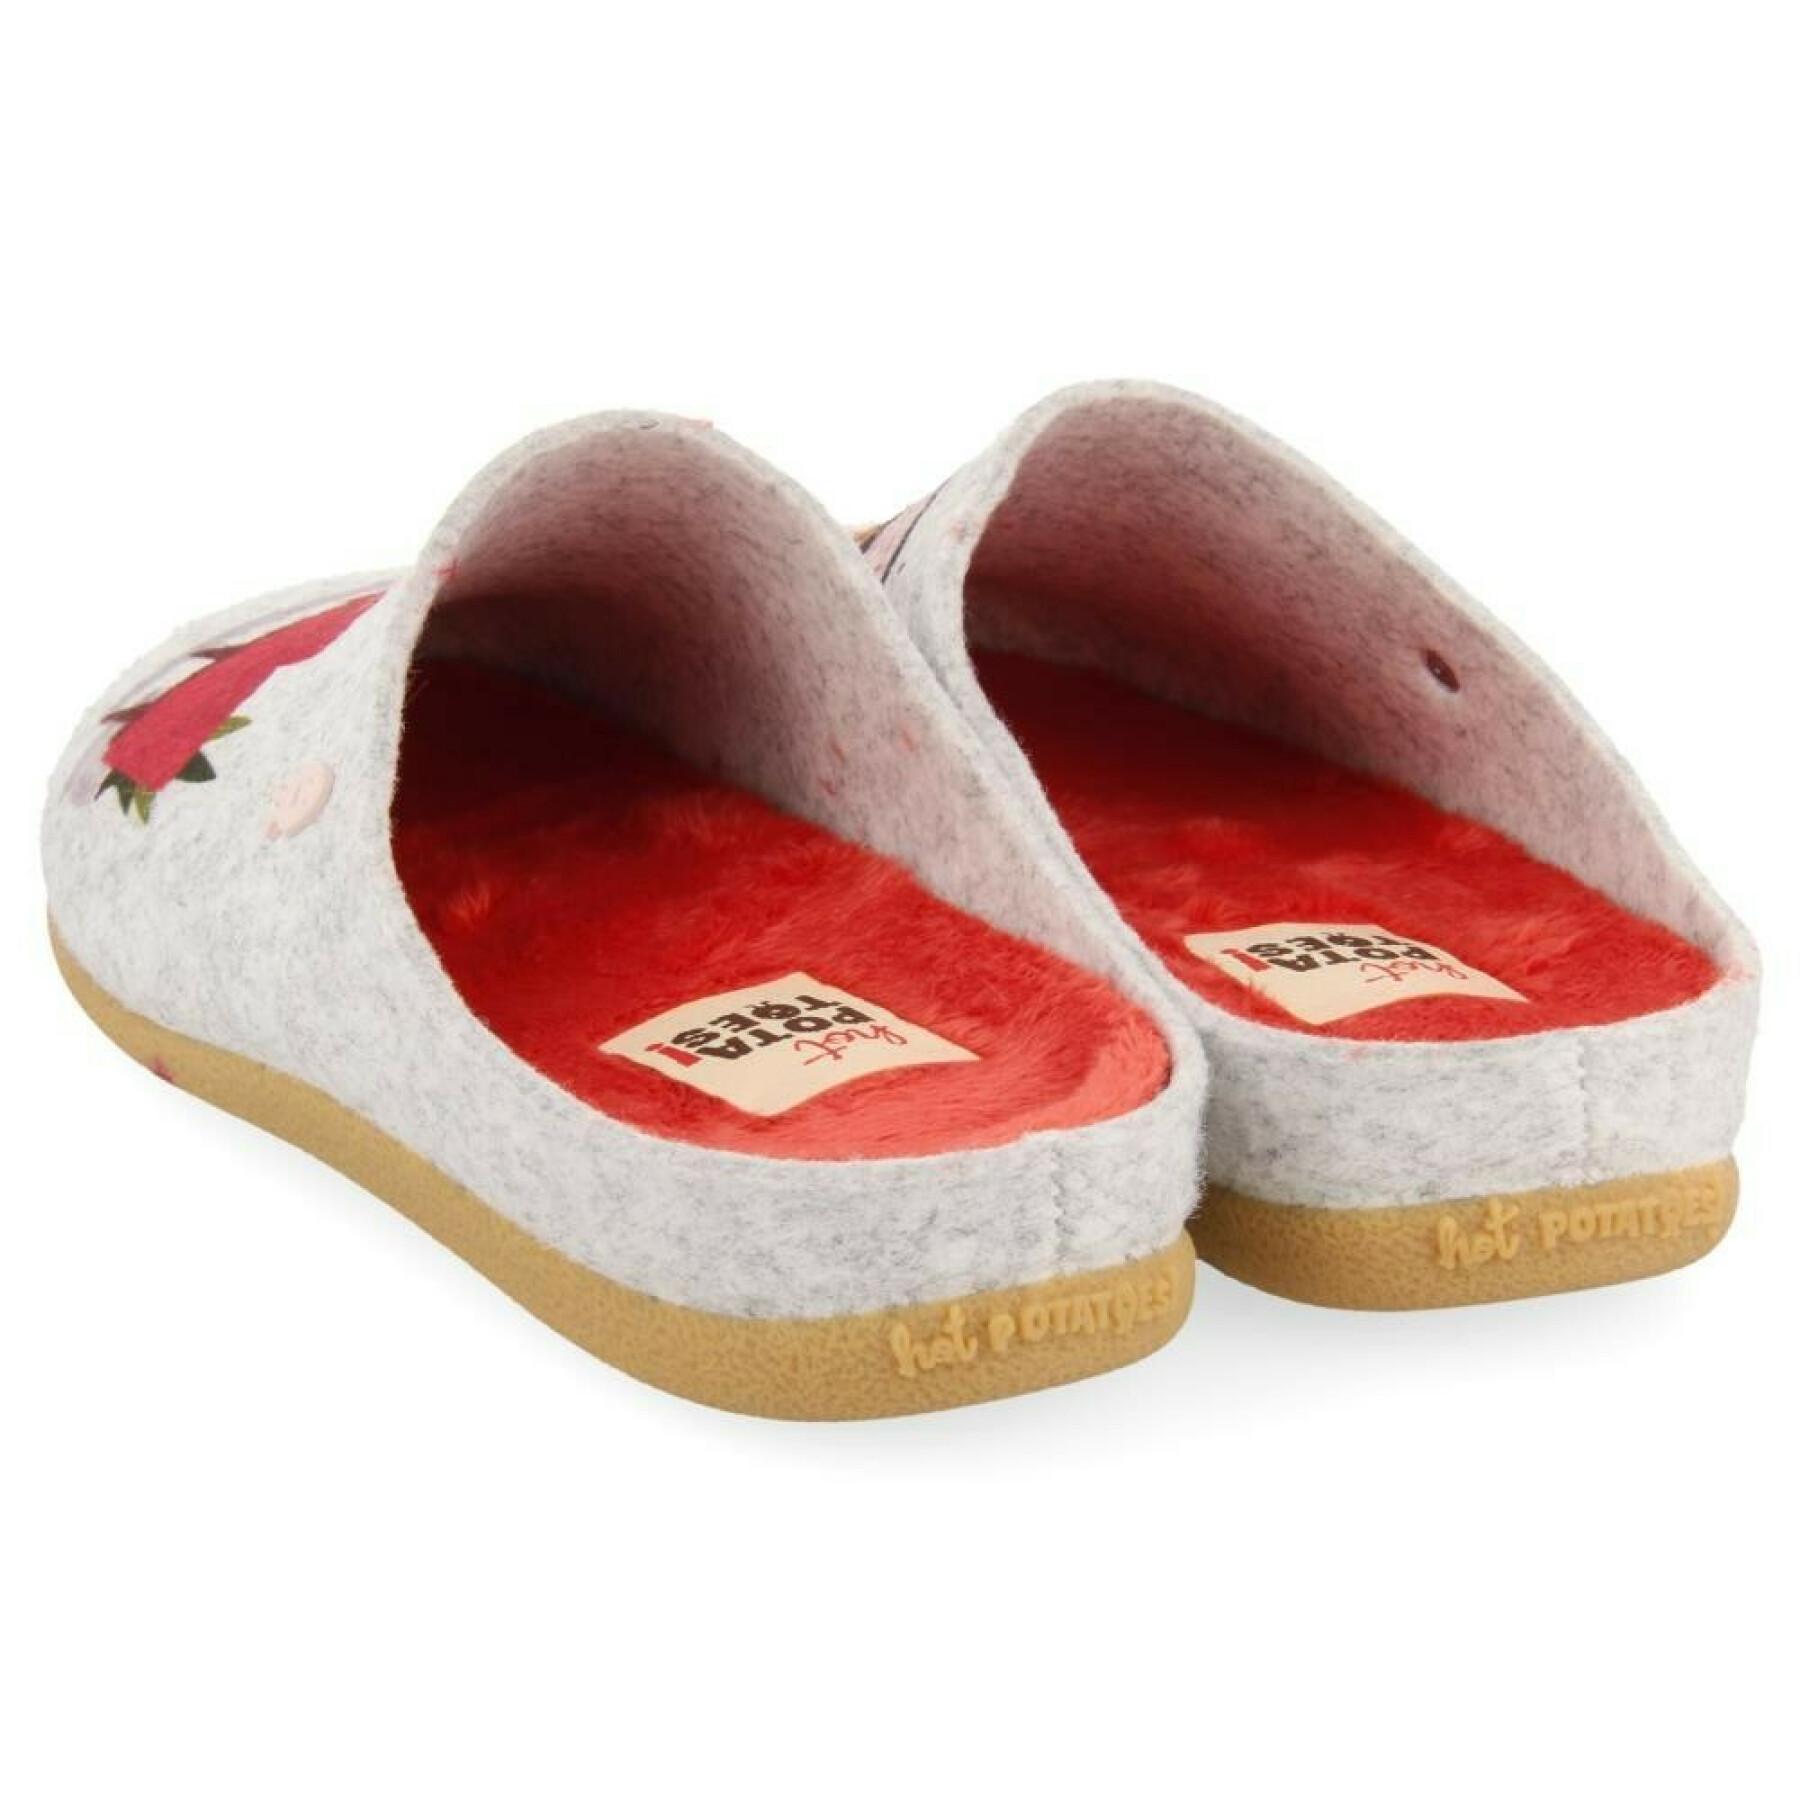 Slippers from the women's collection Hot Potatoes haslach